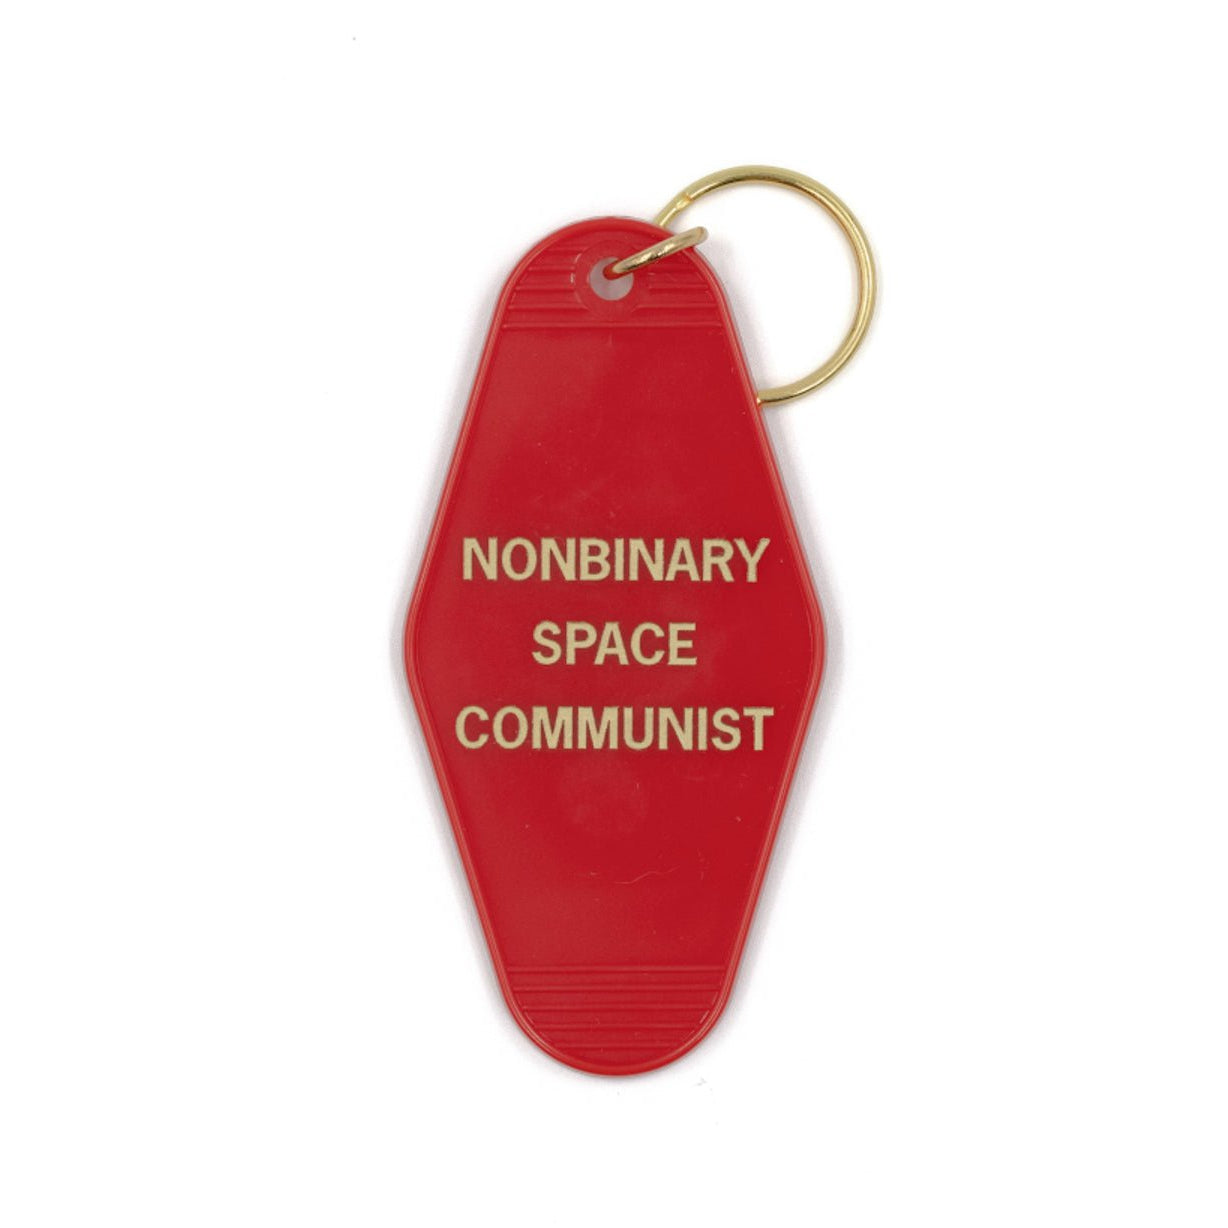 Nonbinary Space Communist Motel Style Keychain in Red and Gold